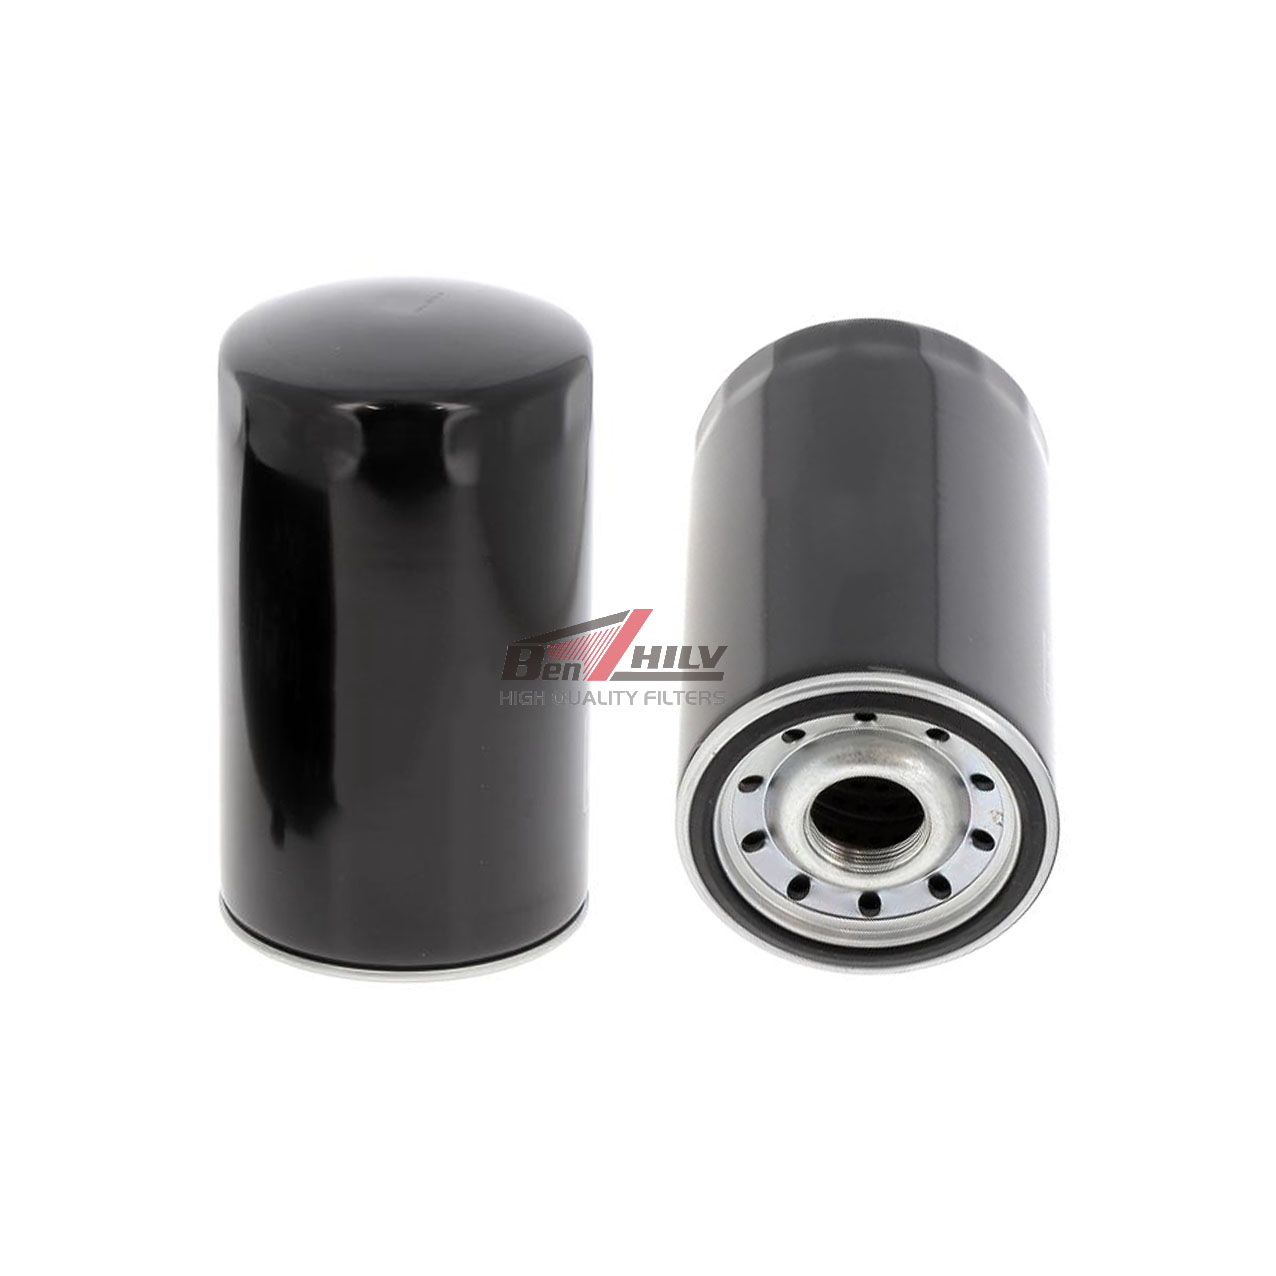 P550596 4448336 4484495 4622562 4658521 1-13240232-1 8-98375860-0 for HITACHI CRAWLER EXCAVATOR part oil filter Assembly